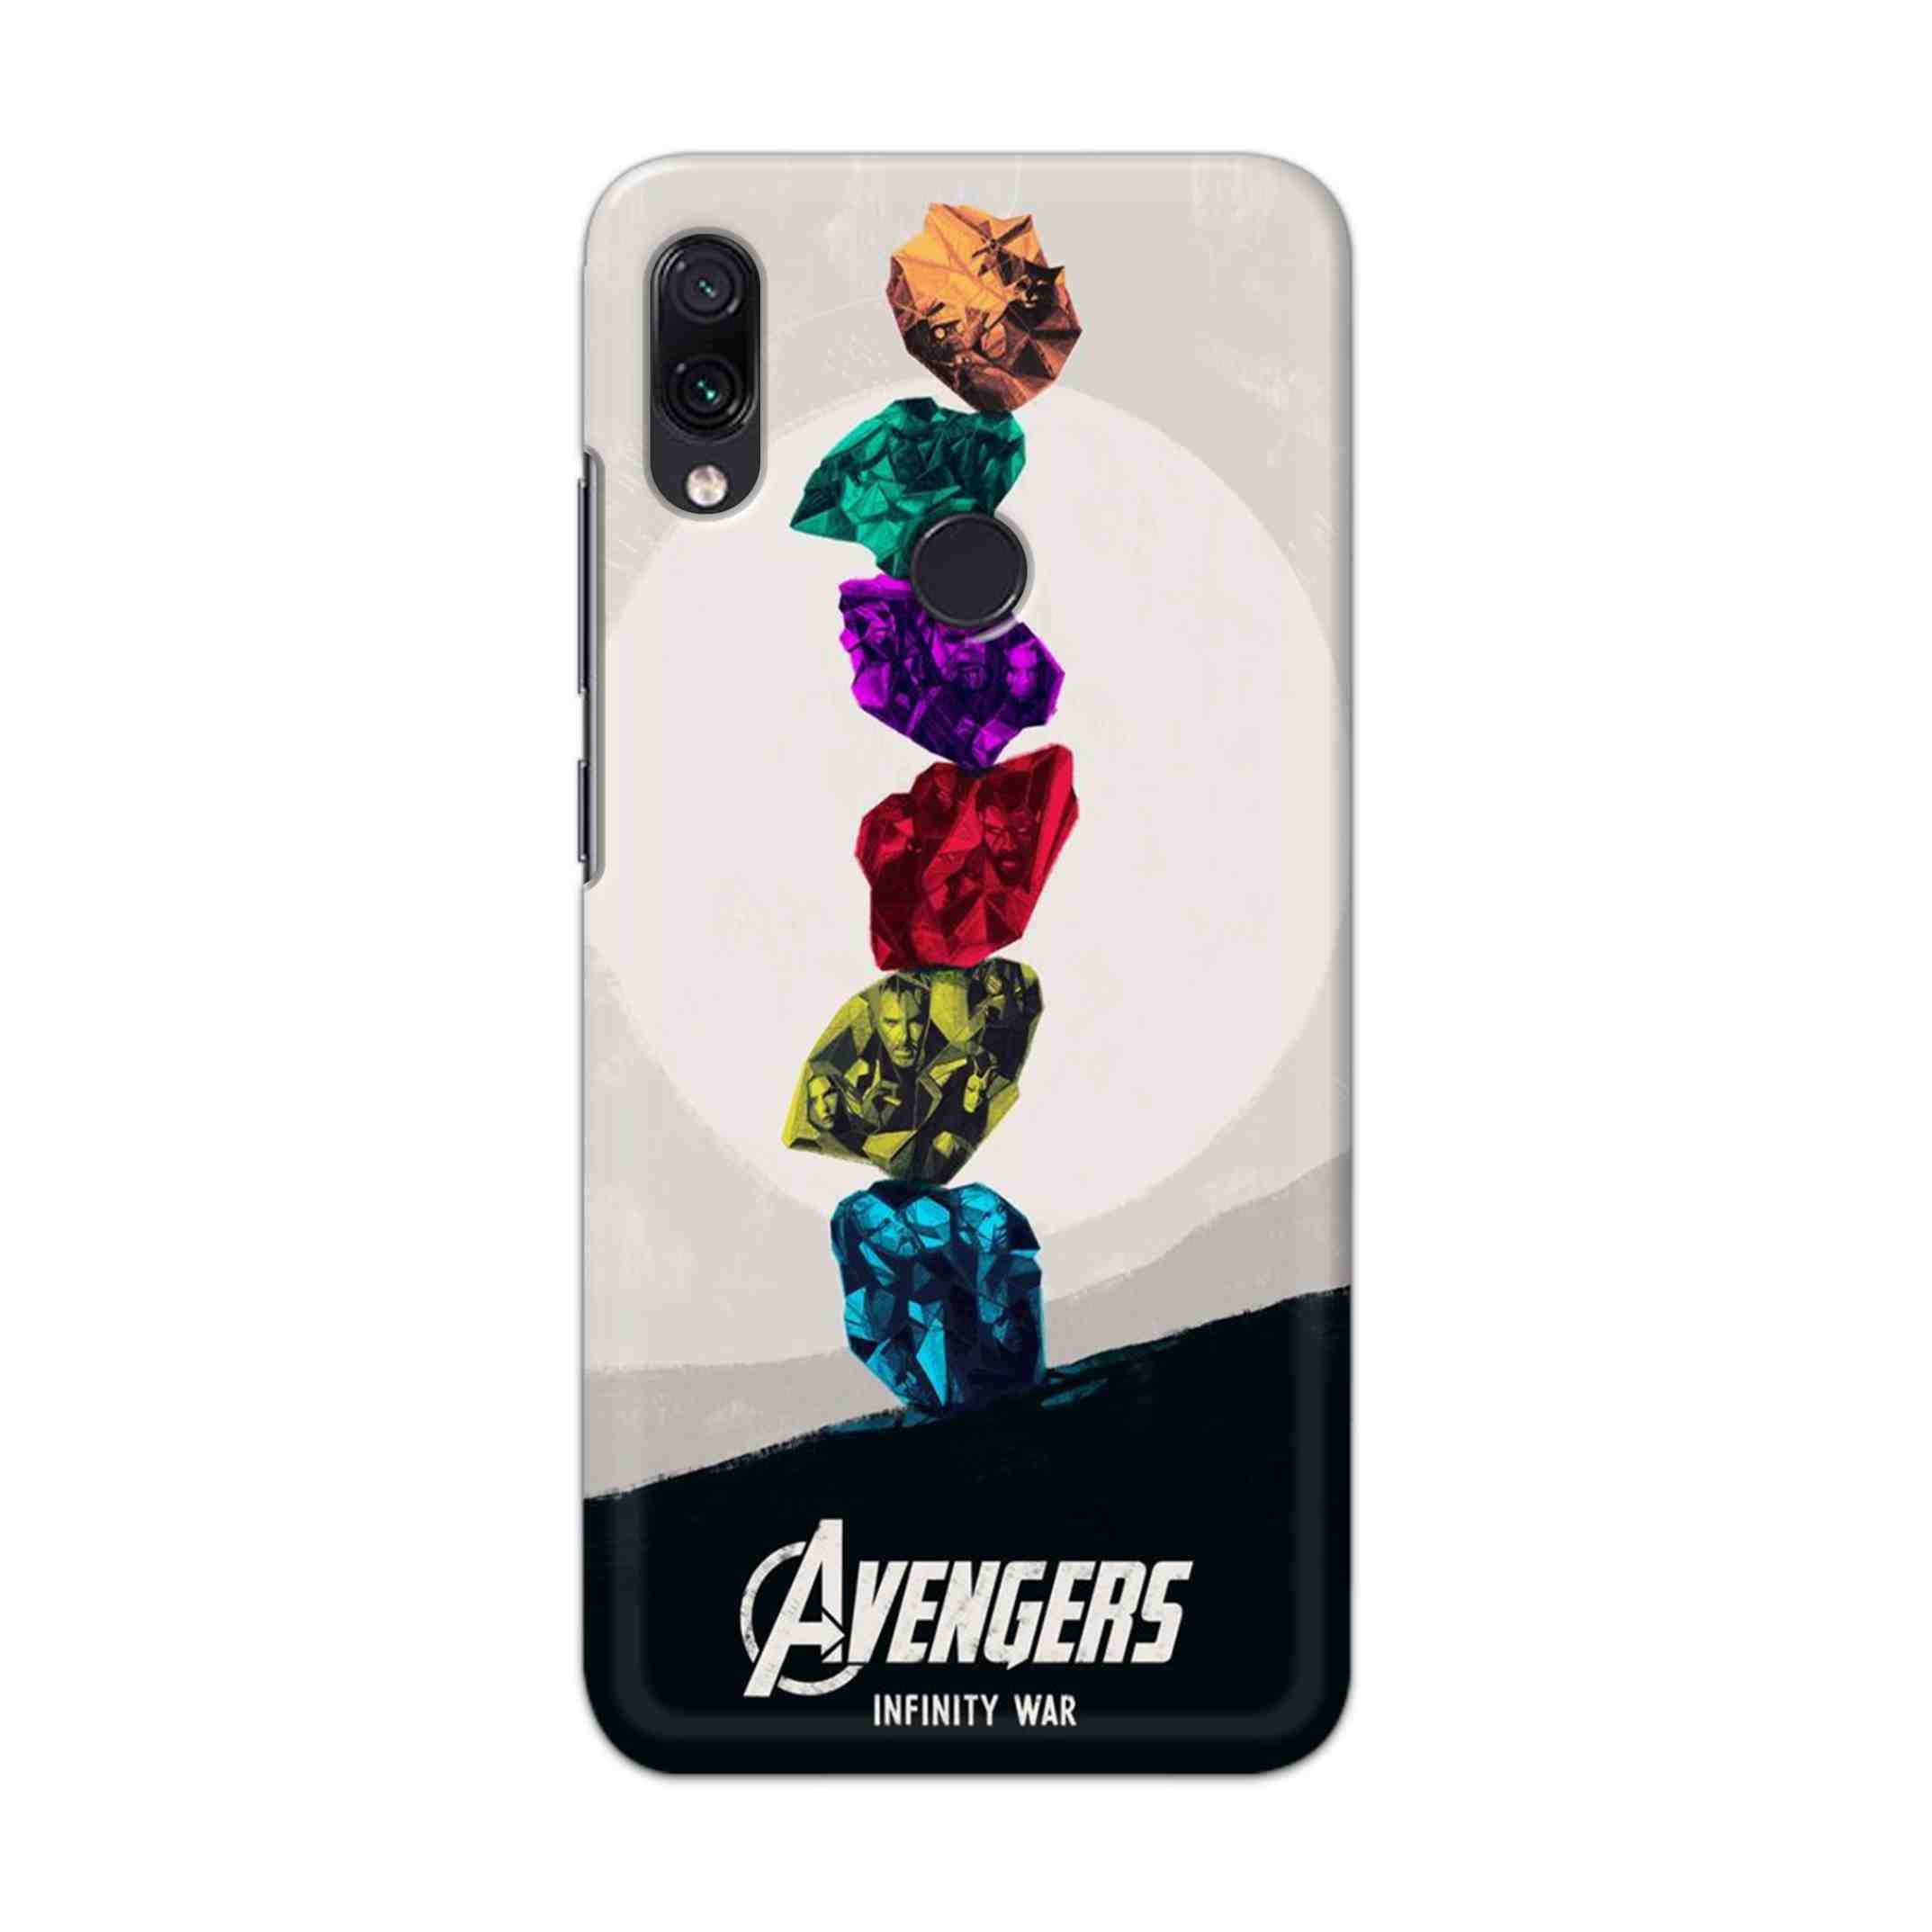 Buy Avengers Stone Hard Back Mobile Phone Case Cover For Xiaomi Redmi 7 Online